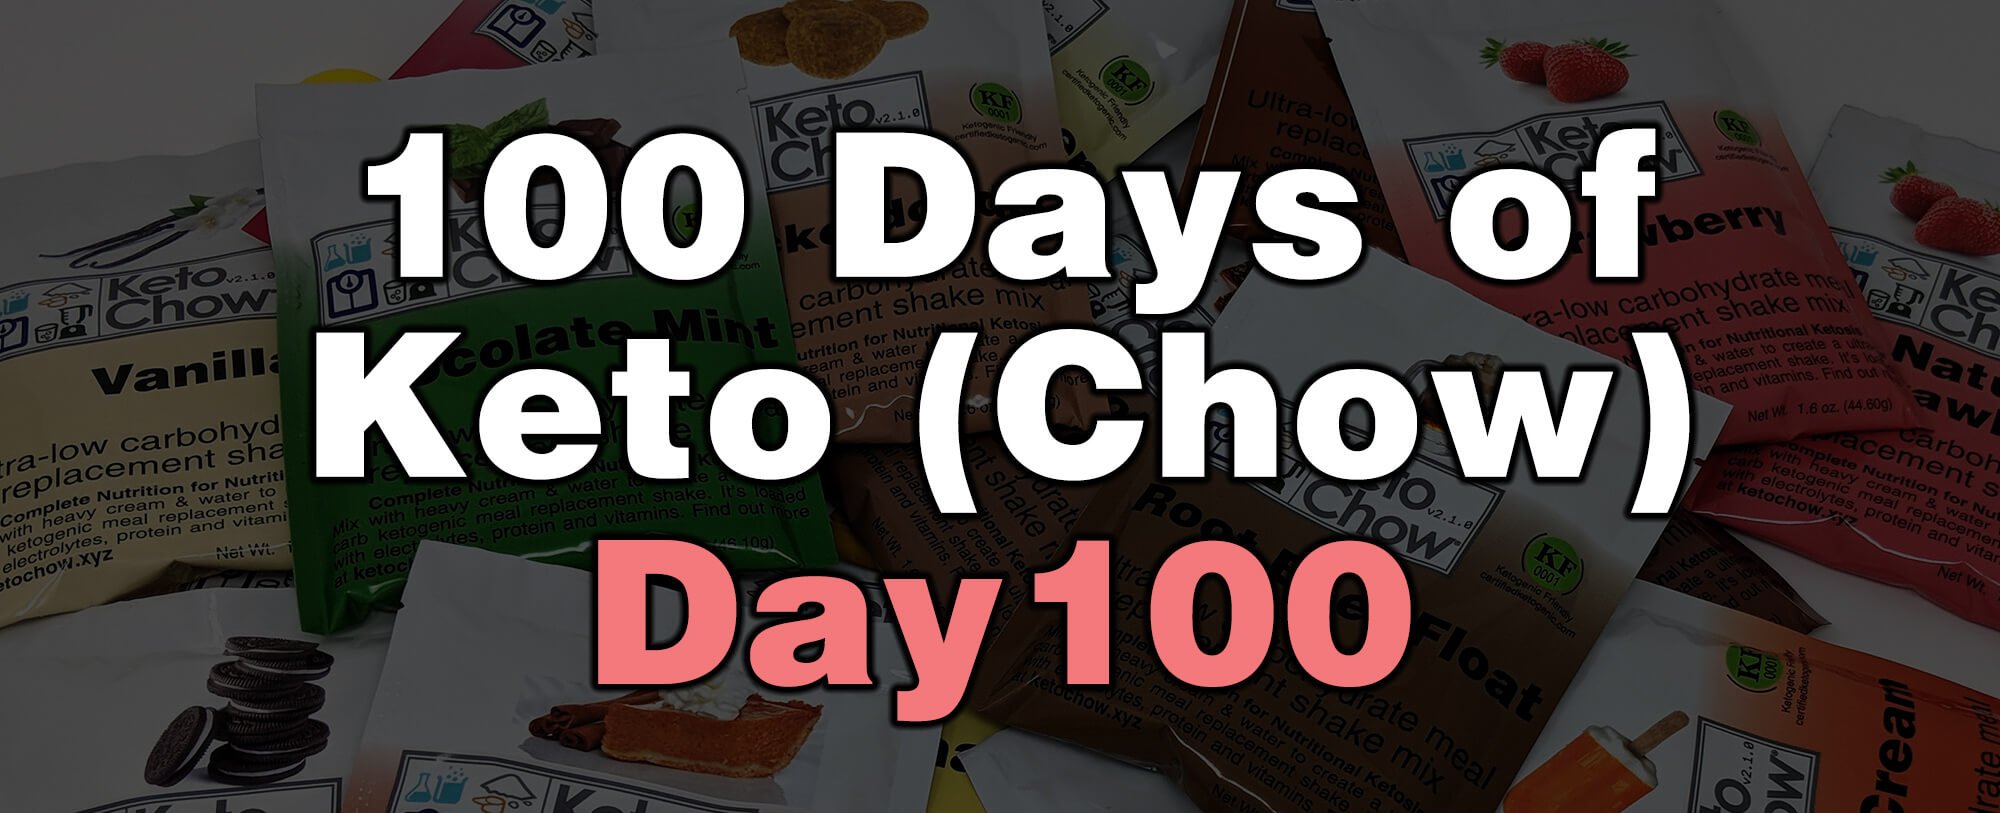 100 days of keto chow day 100